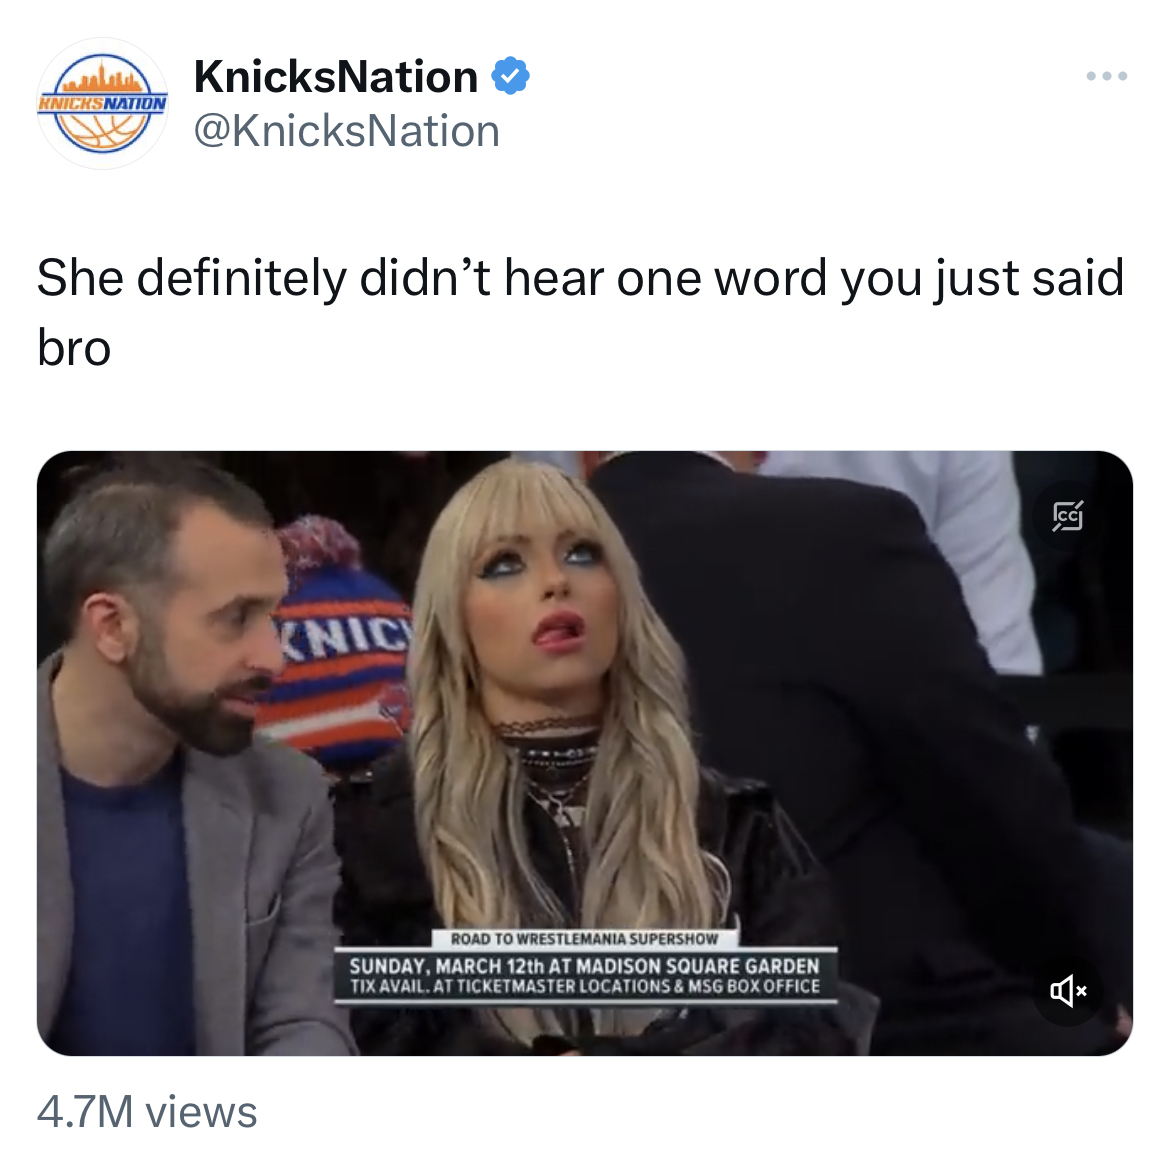 funny tweets - photo caption - KnicksNation Ninis Nation She definitely didn't hear one word you just said bro 4.7M views Knic Road To Wrestlemania Supershow Sunday, March 12th At Madison Square Garden Tix Avail. At Ticketmaster Locations & Msg Box Office